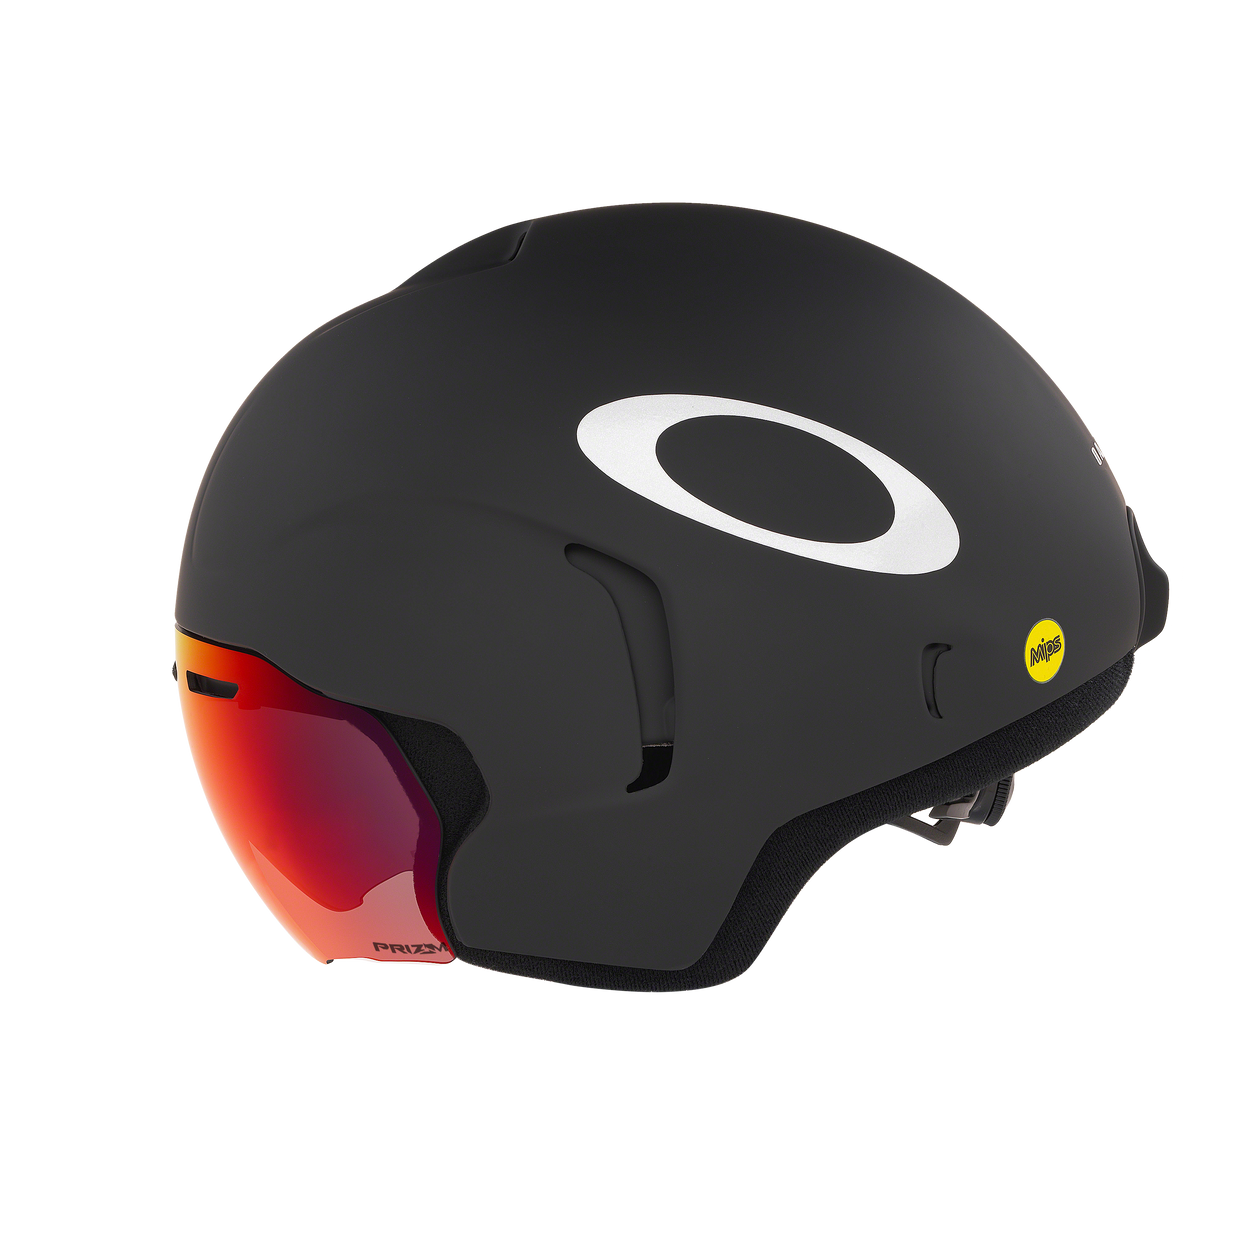 OAKLEY ROAD AERO CYCLING MIPS HELMET WITH MAGNETIC VISOR – New Day Sports